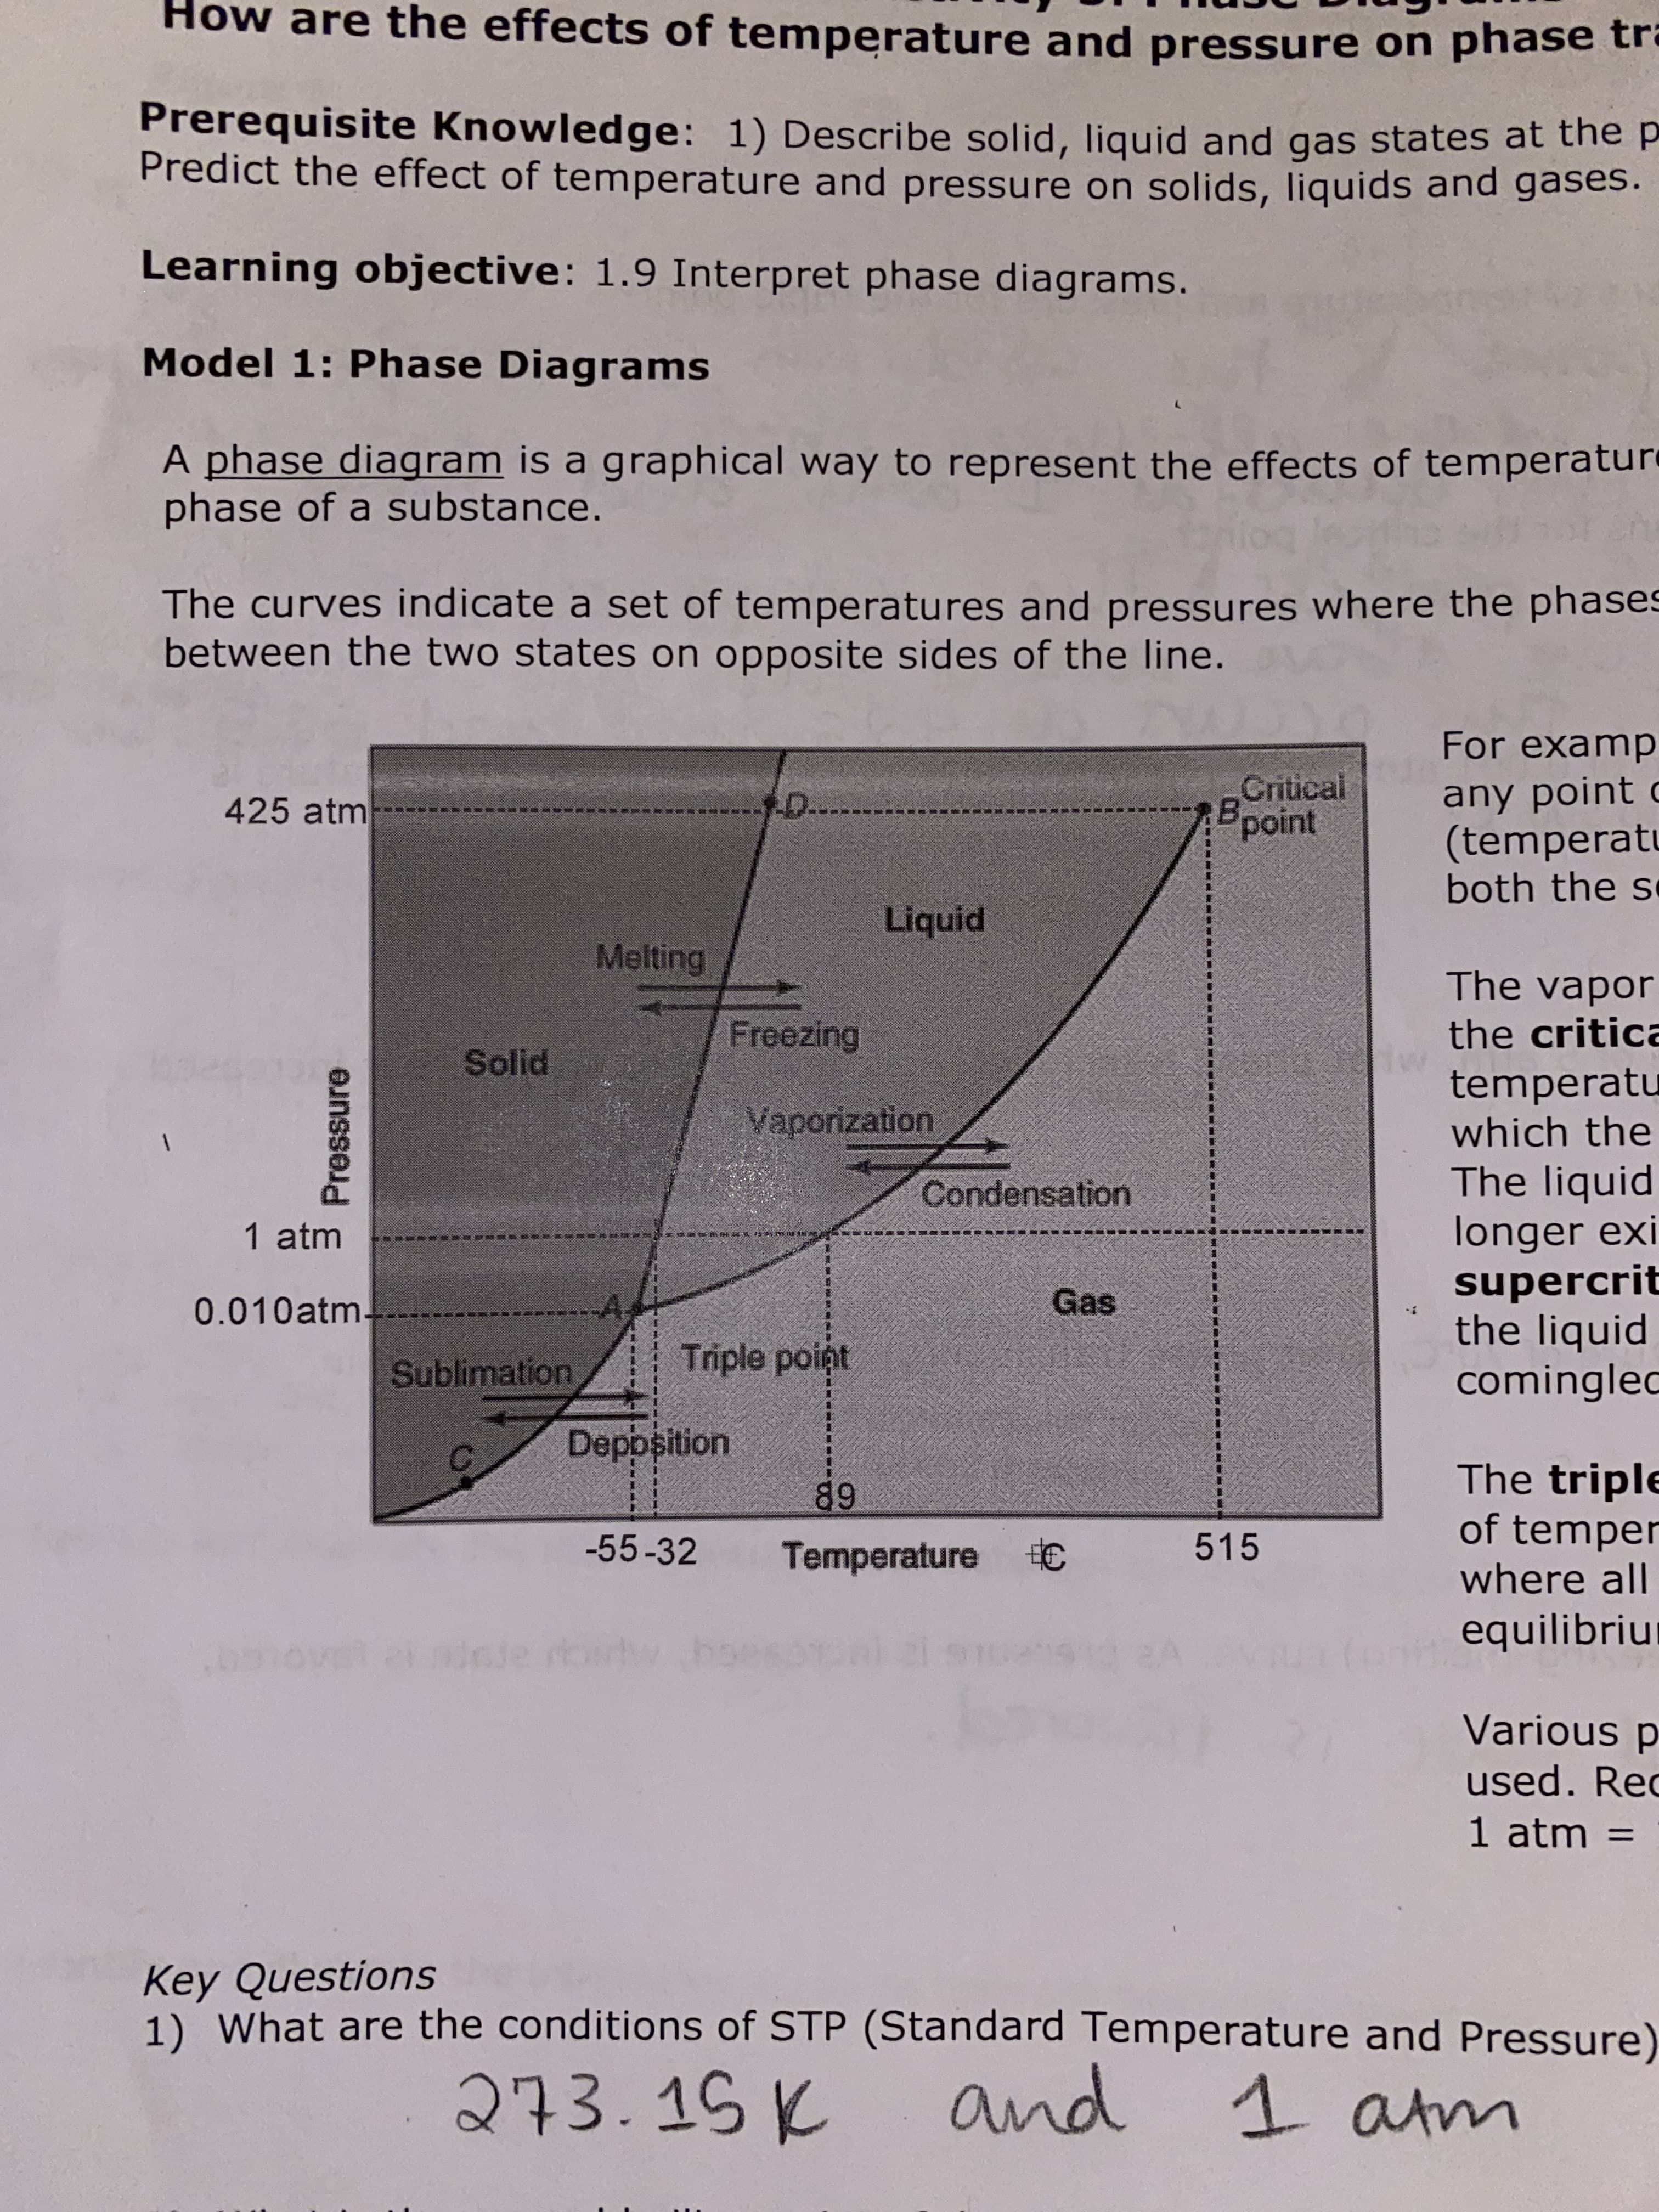 How are the effects of temperature and pressure on phase tre
Prerequisite Knowledge: 1) Describe solid, liquid and gas states at the p
Predict the effect of temperature and pressure on solids, liquids and gases.
Learning objective: 1.9 Interpret phase diagrams.
Model 1: Phase Diagrams
A phase diagram is a graphical way to represent the effects of temperatur
phase of a substance.
The curves indicate a set of temperatures and pressures where the phases
between the two states on opposite sides of the line.
For examp
Critical
Bpoint
any point c
(temperatu
both the s
-D.
425 atm
Liquid
Melting
The vapor
Freezing
the critica
Solid
temperatu
which the
Vaporization
The liquid
longer exi
supercrit
the liquid
comingled
Condensation
1 atm
Gas
-A,
0.010atm-
Triple point
Sublimation
Deppsition
The triple
of temper
where all
89
515
-55-32
Temperature €
equilibriu
sle rorwhoes
Various p
used. Rec
1 atm =
Key Questions
1) What are the conditions of STP (Standard Temperature and Pressure)
273.15 K
and
1 atm
Pressure
